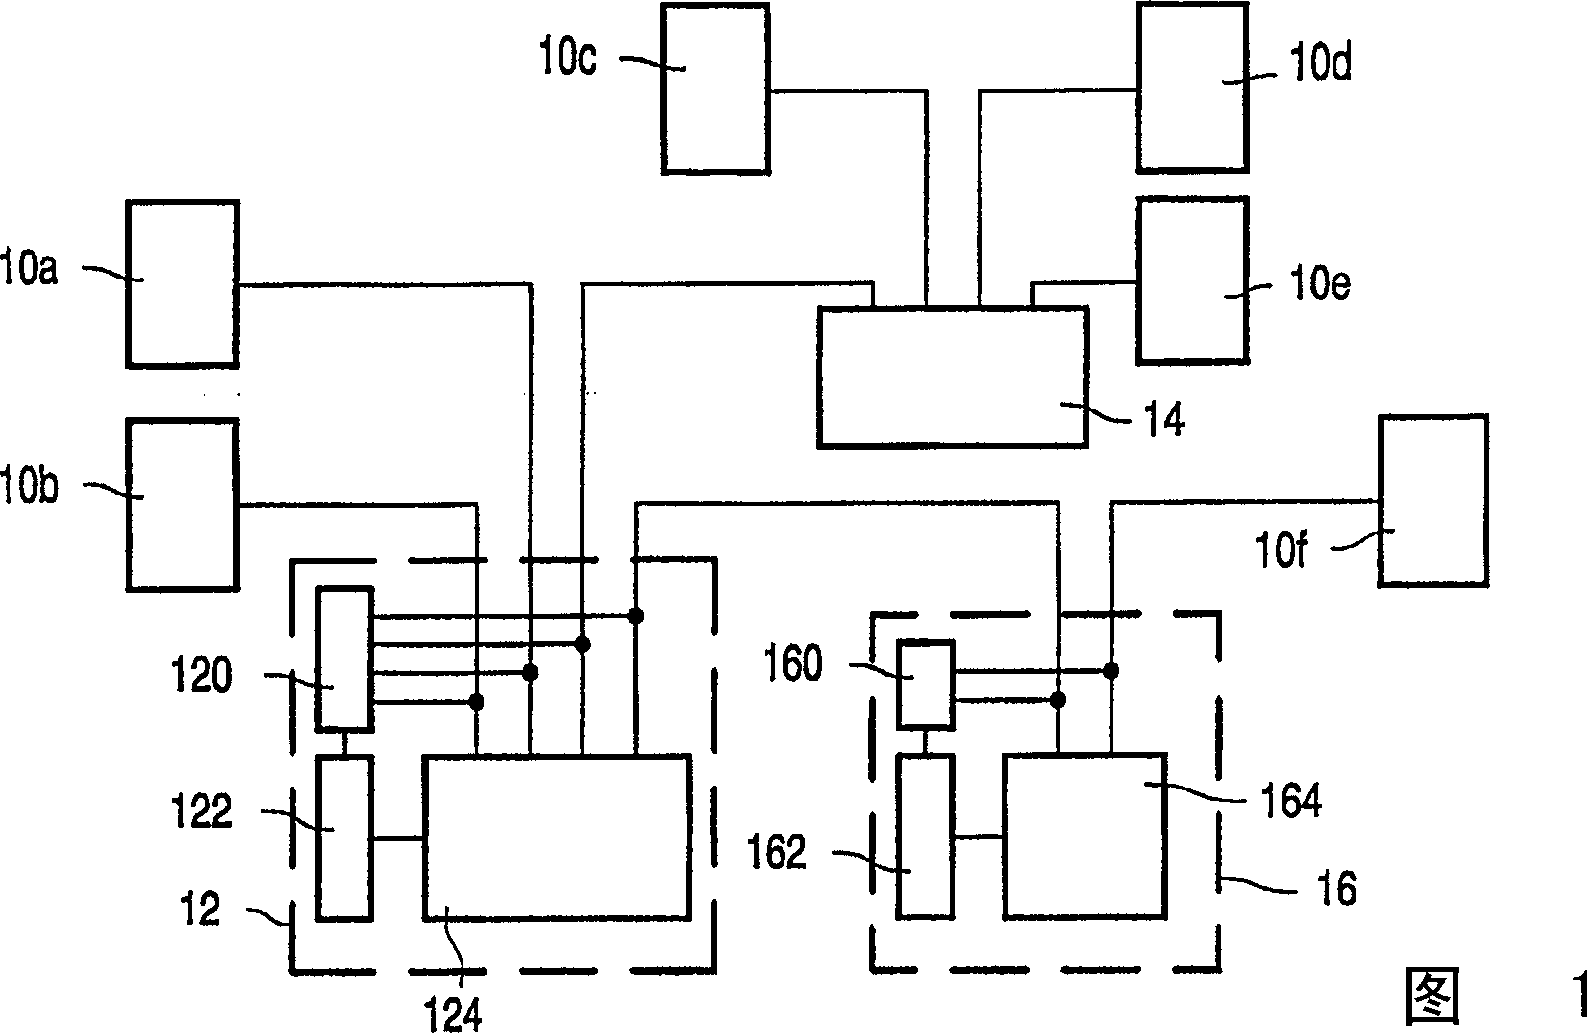 Communication bus system operable in a sleep mode and a normal mode